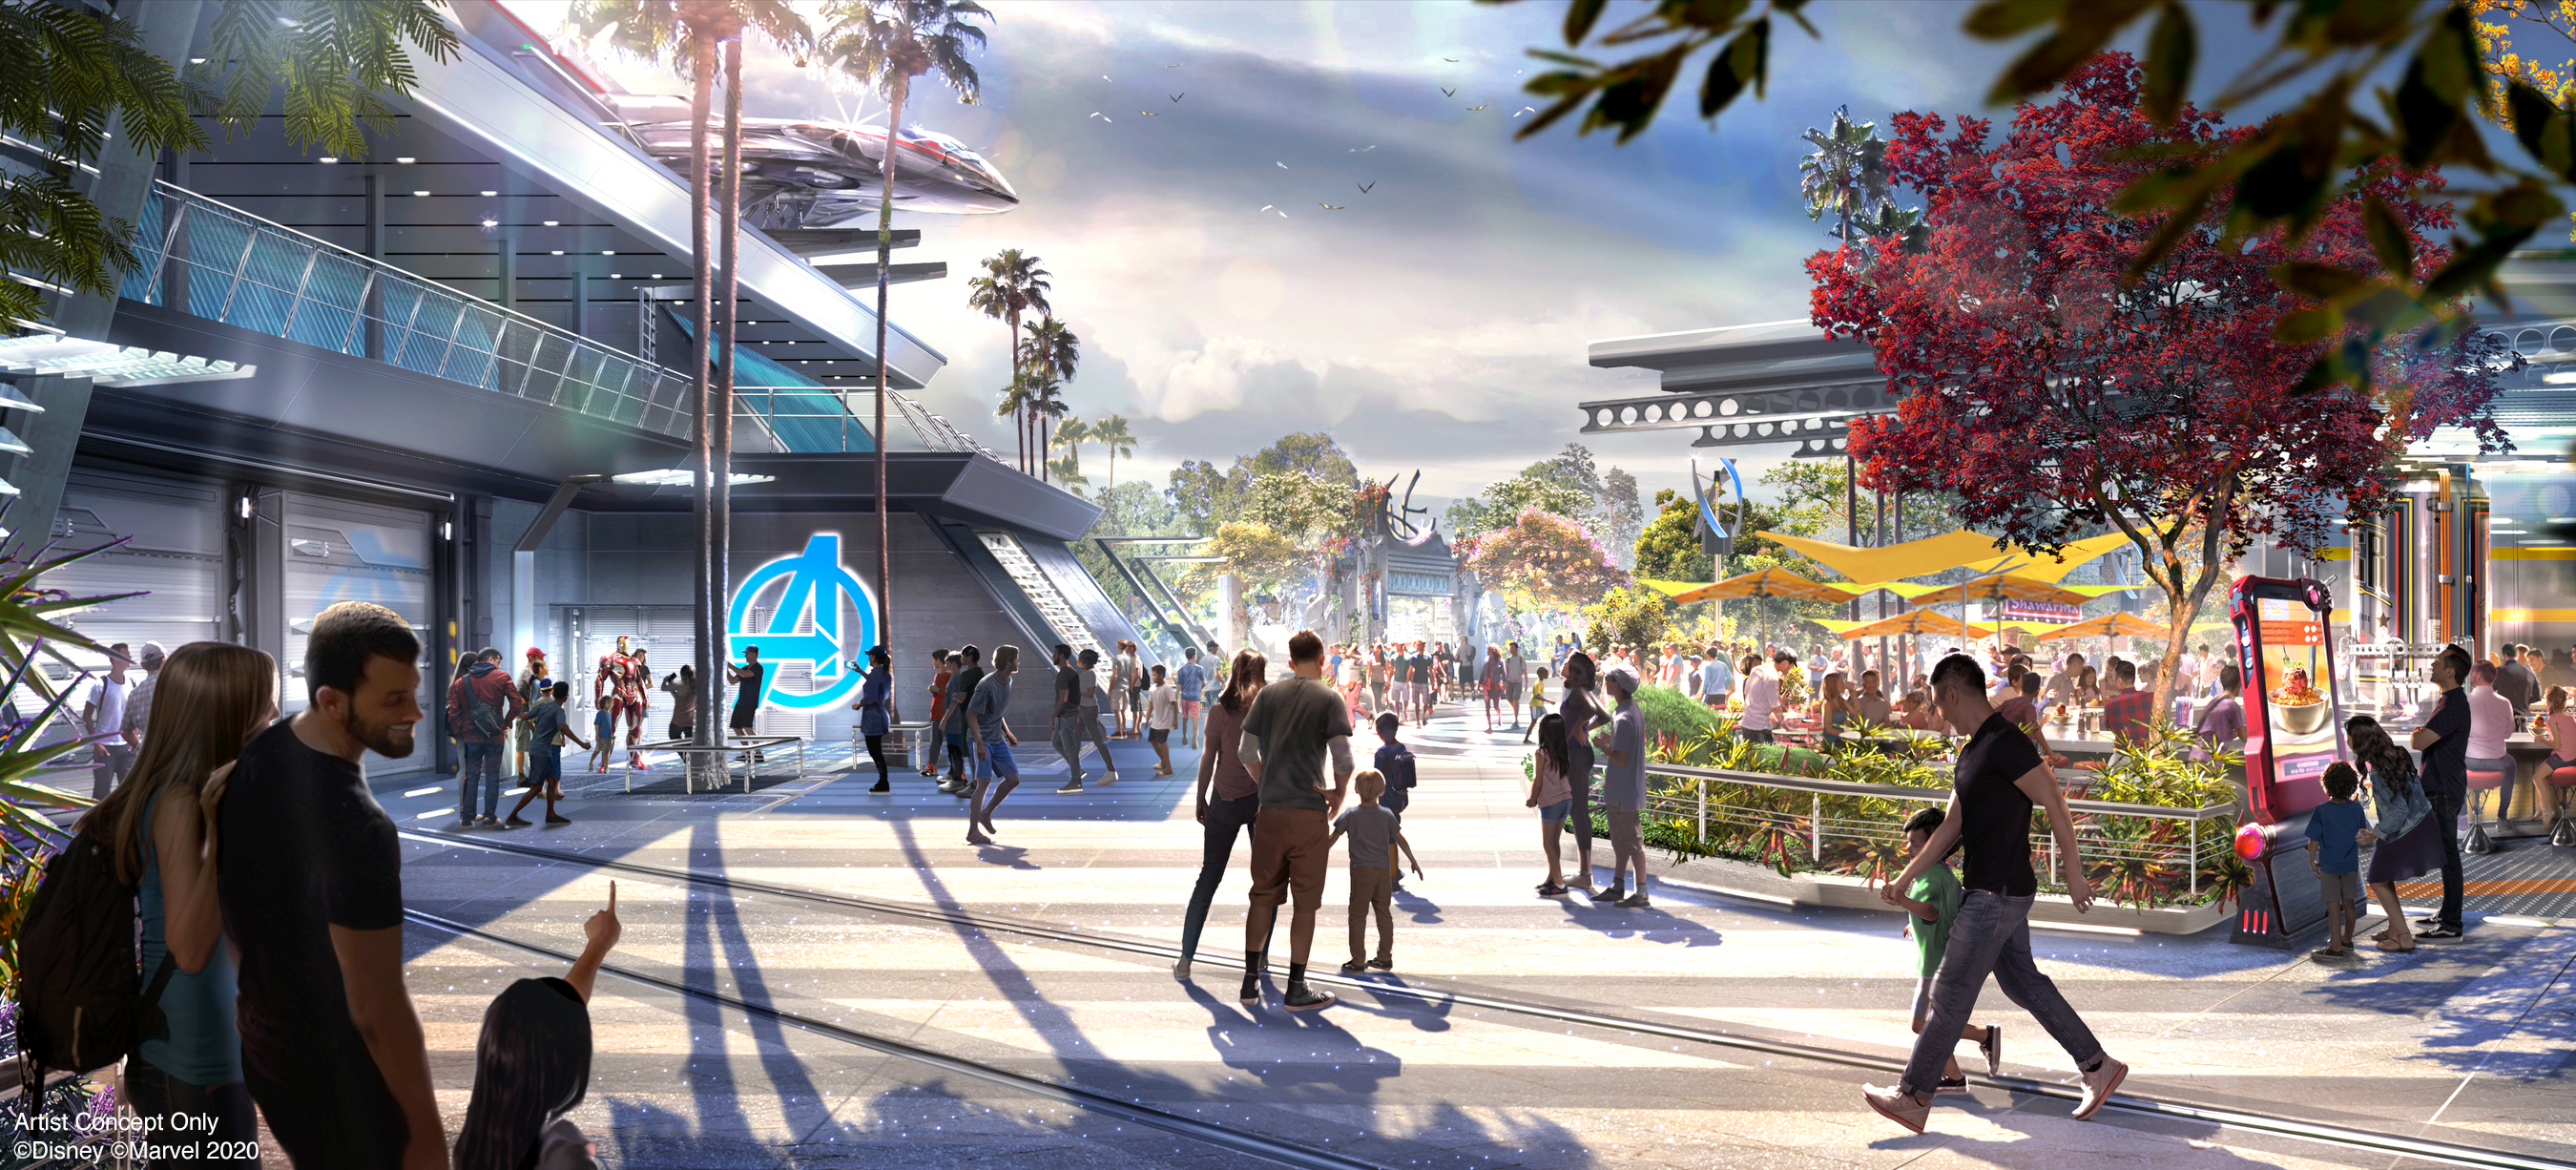 Avengers Campus is an entirely new land dedicated to discovering, recruiting and training the next generation of heroes, opening in summer 2020 at Disney California Adventure Park in Anaheim, California. To the right of the image, the outdoor seating area at Pym Test Kitchen is a great place to fuel up and watch for Super Heroes at the nearby Avengers Headquarters